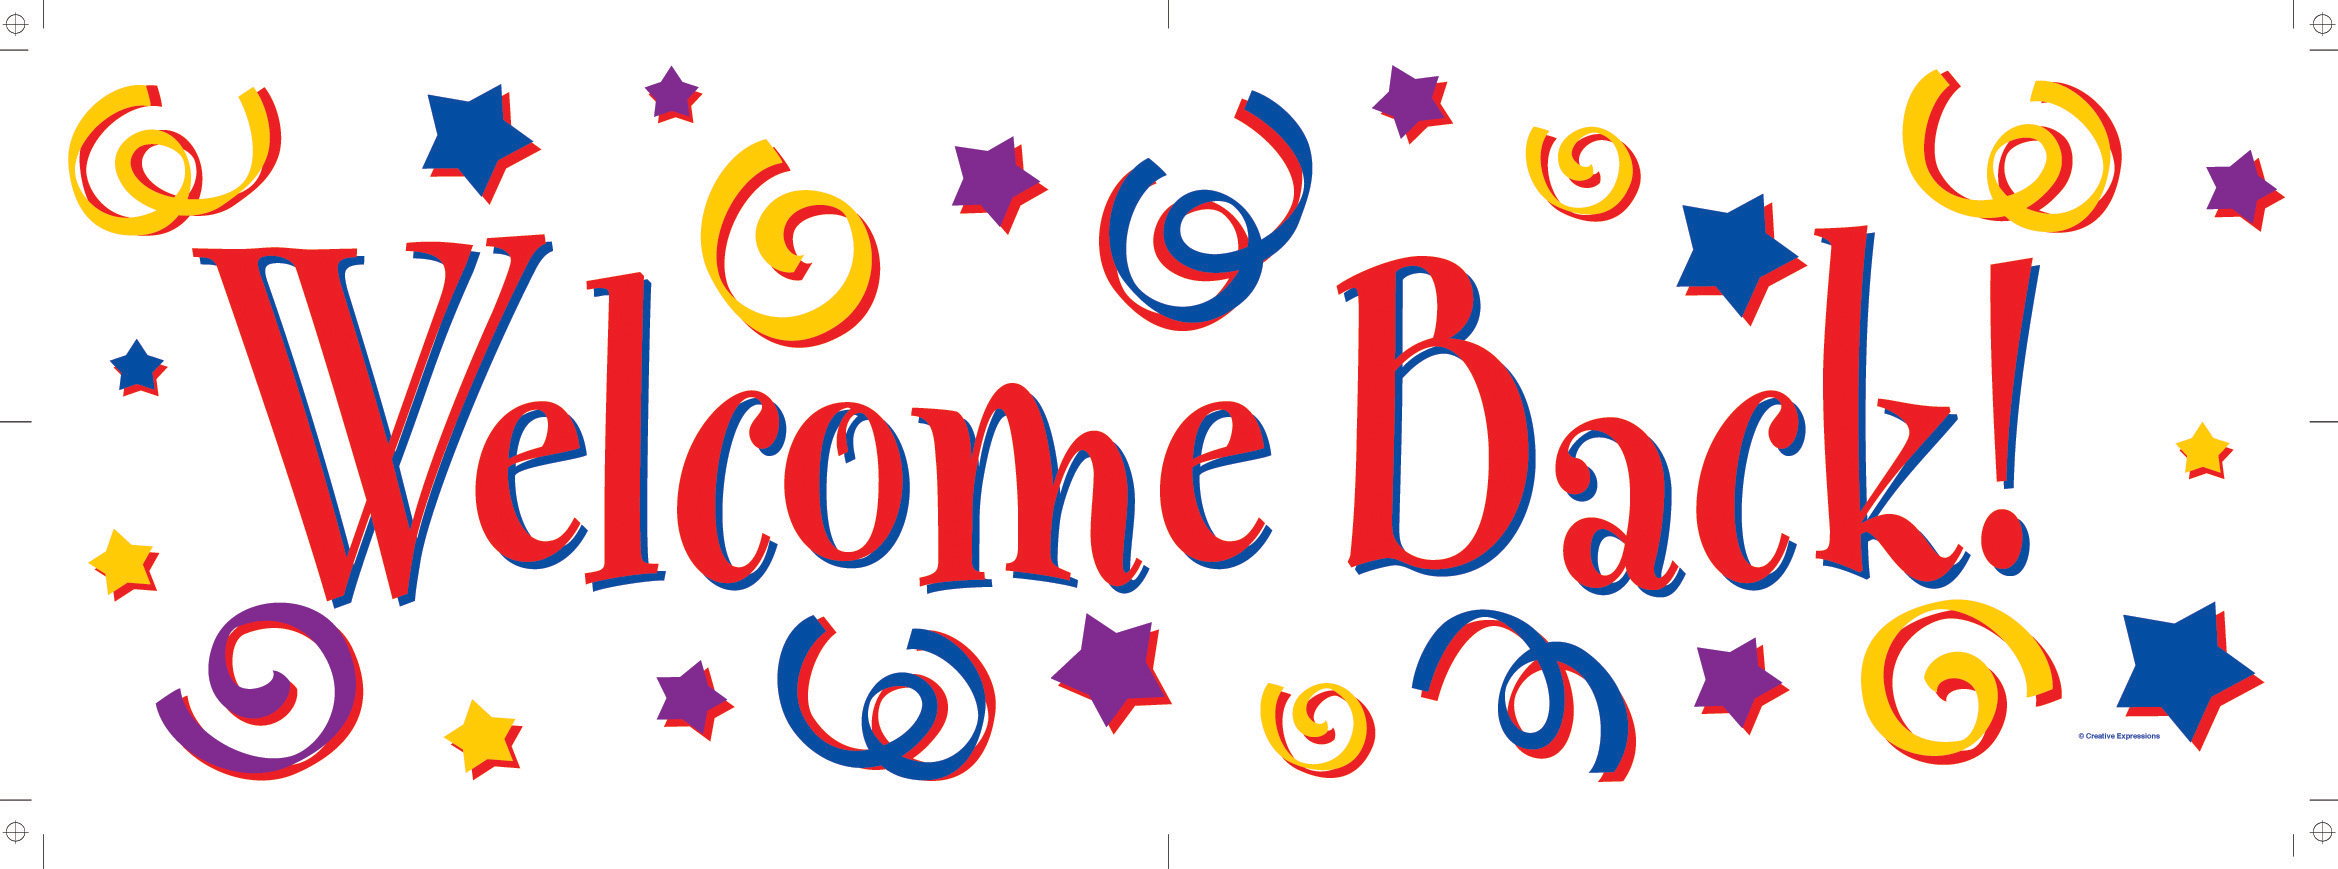 Welcome Back To Work Clipart Galleries Related Welcome Back